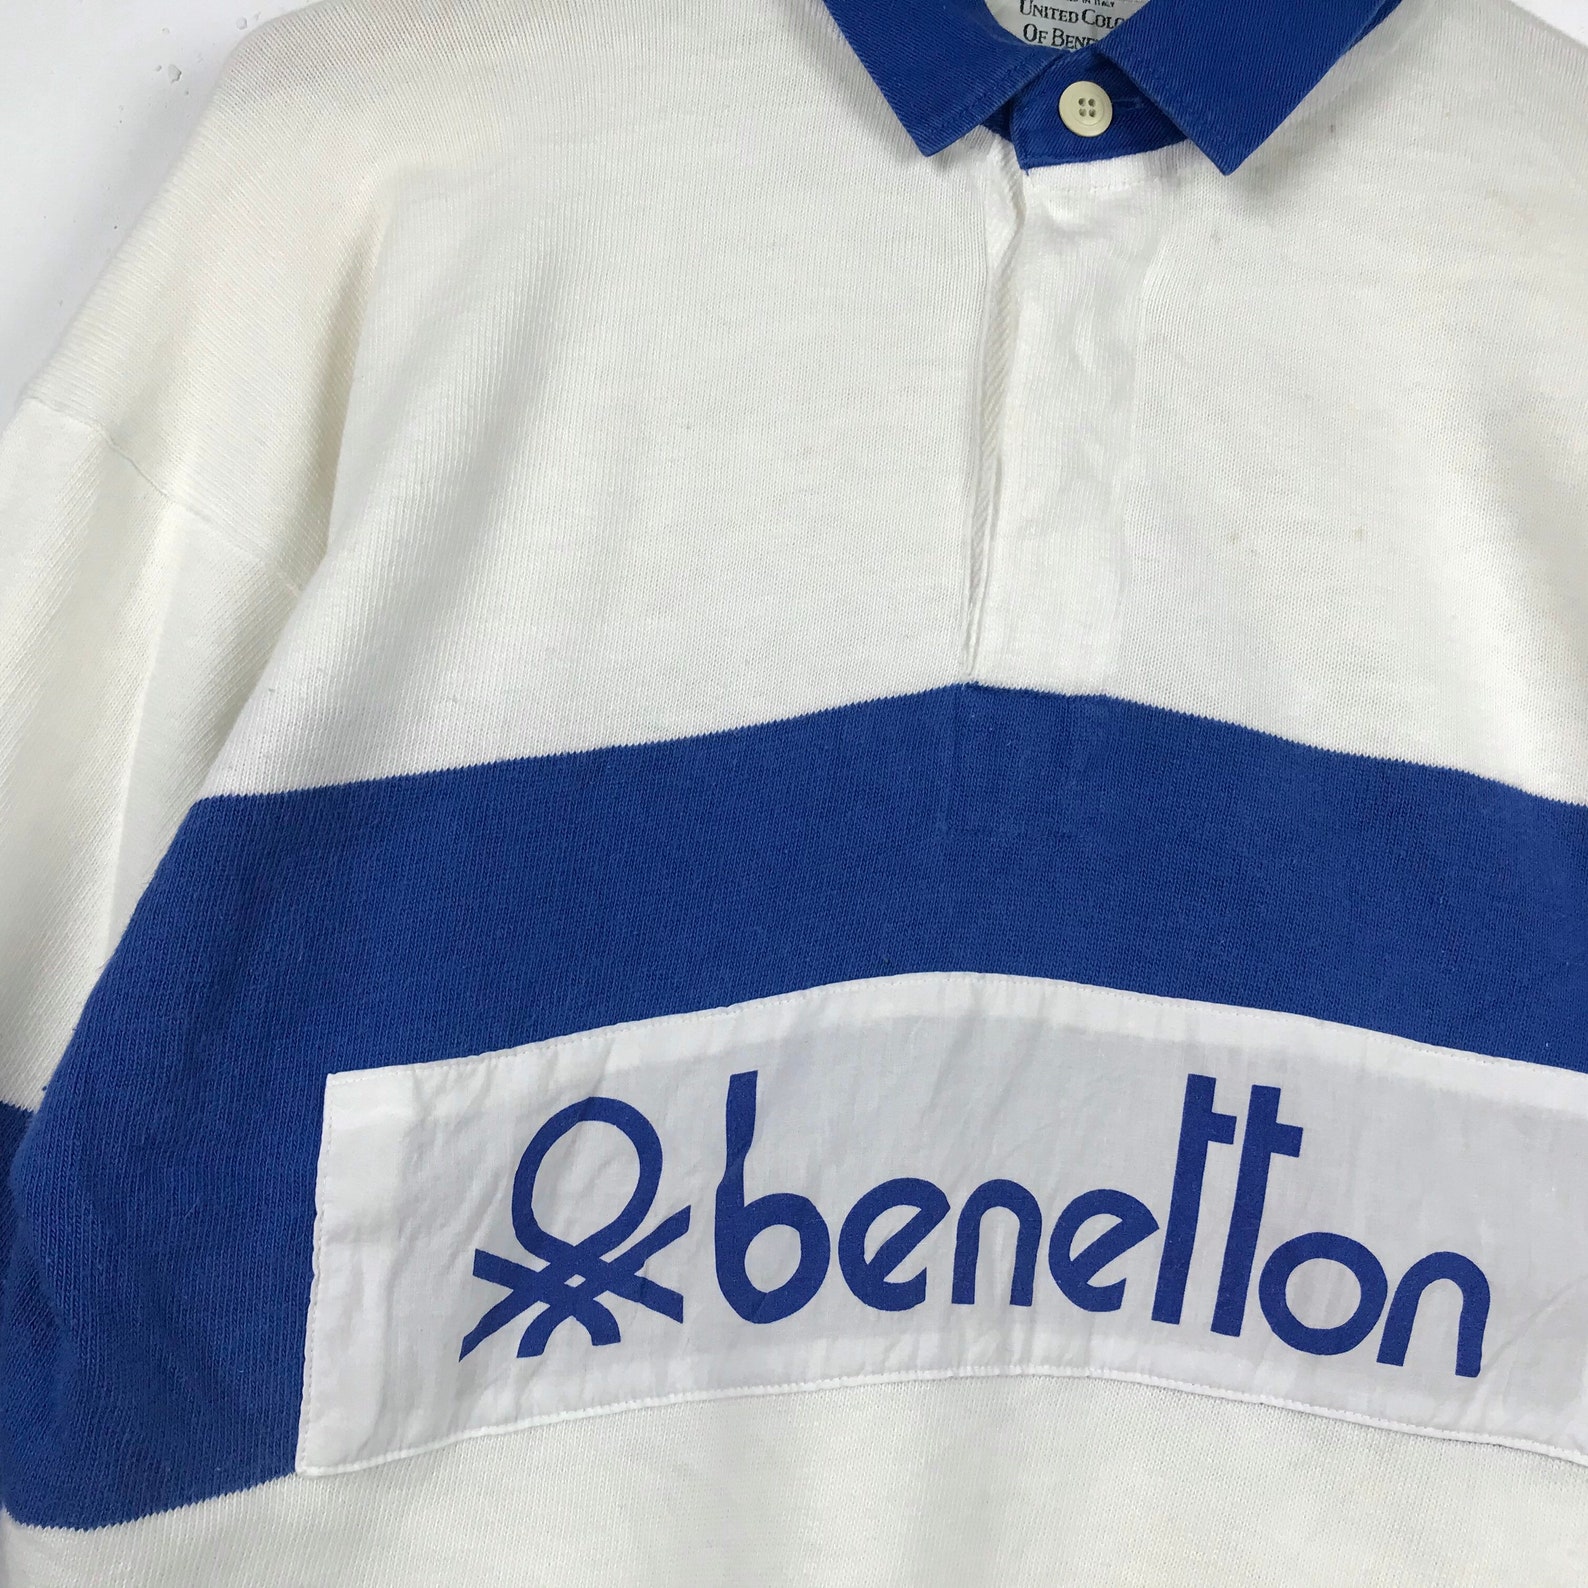 RARE Vintage Benetton Rugby Shirt Vintage 80s Benetton Made | Etsy